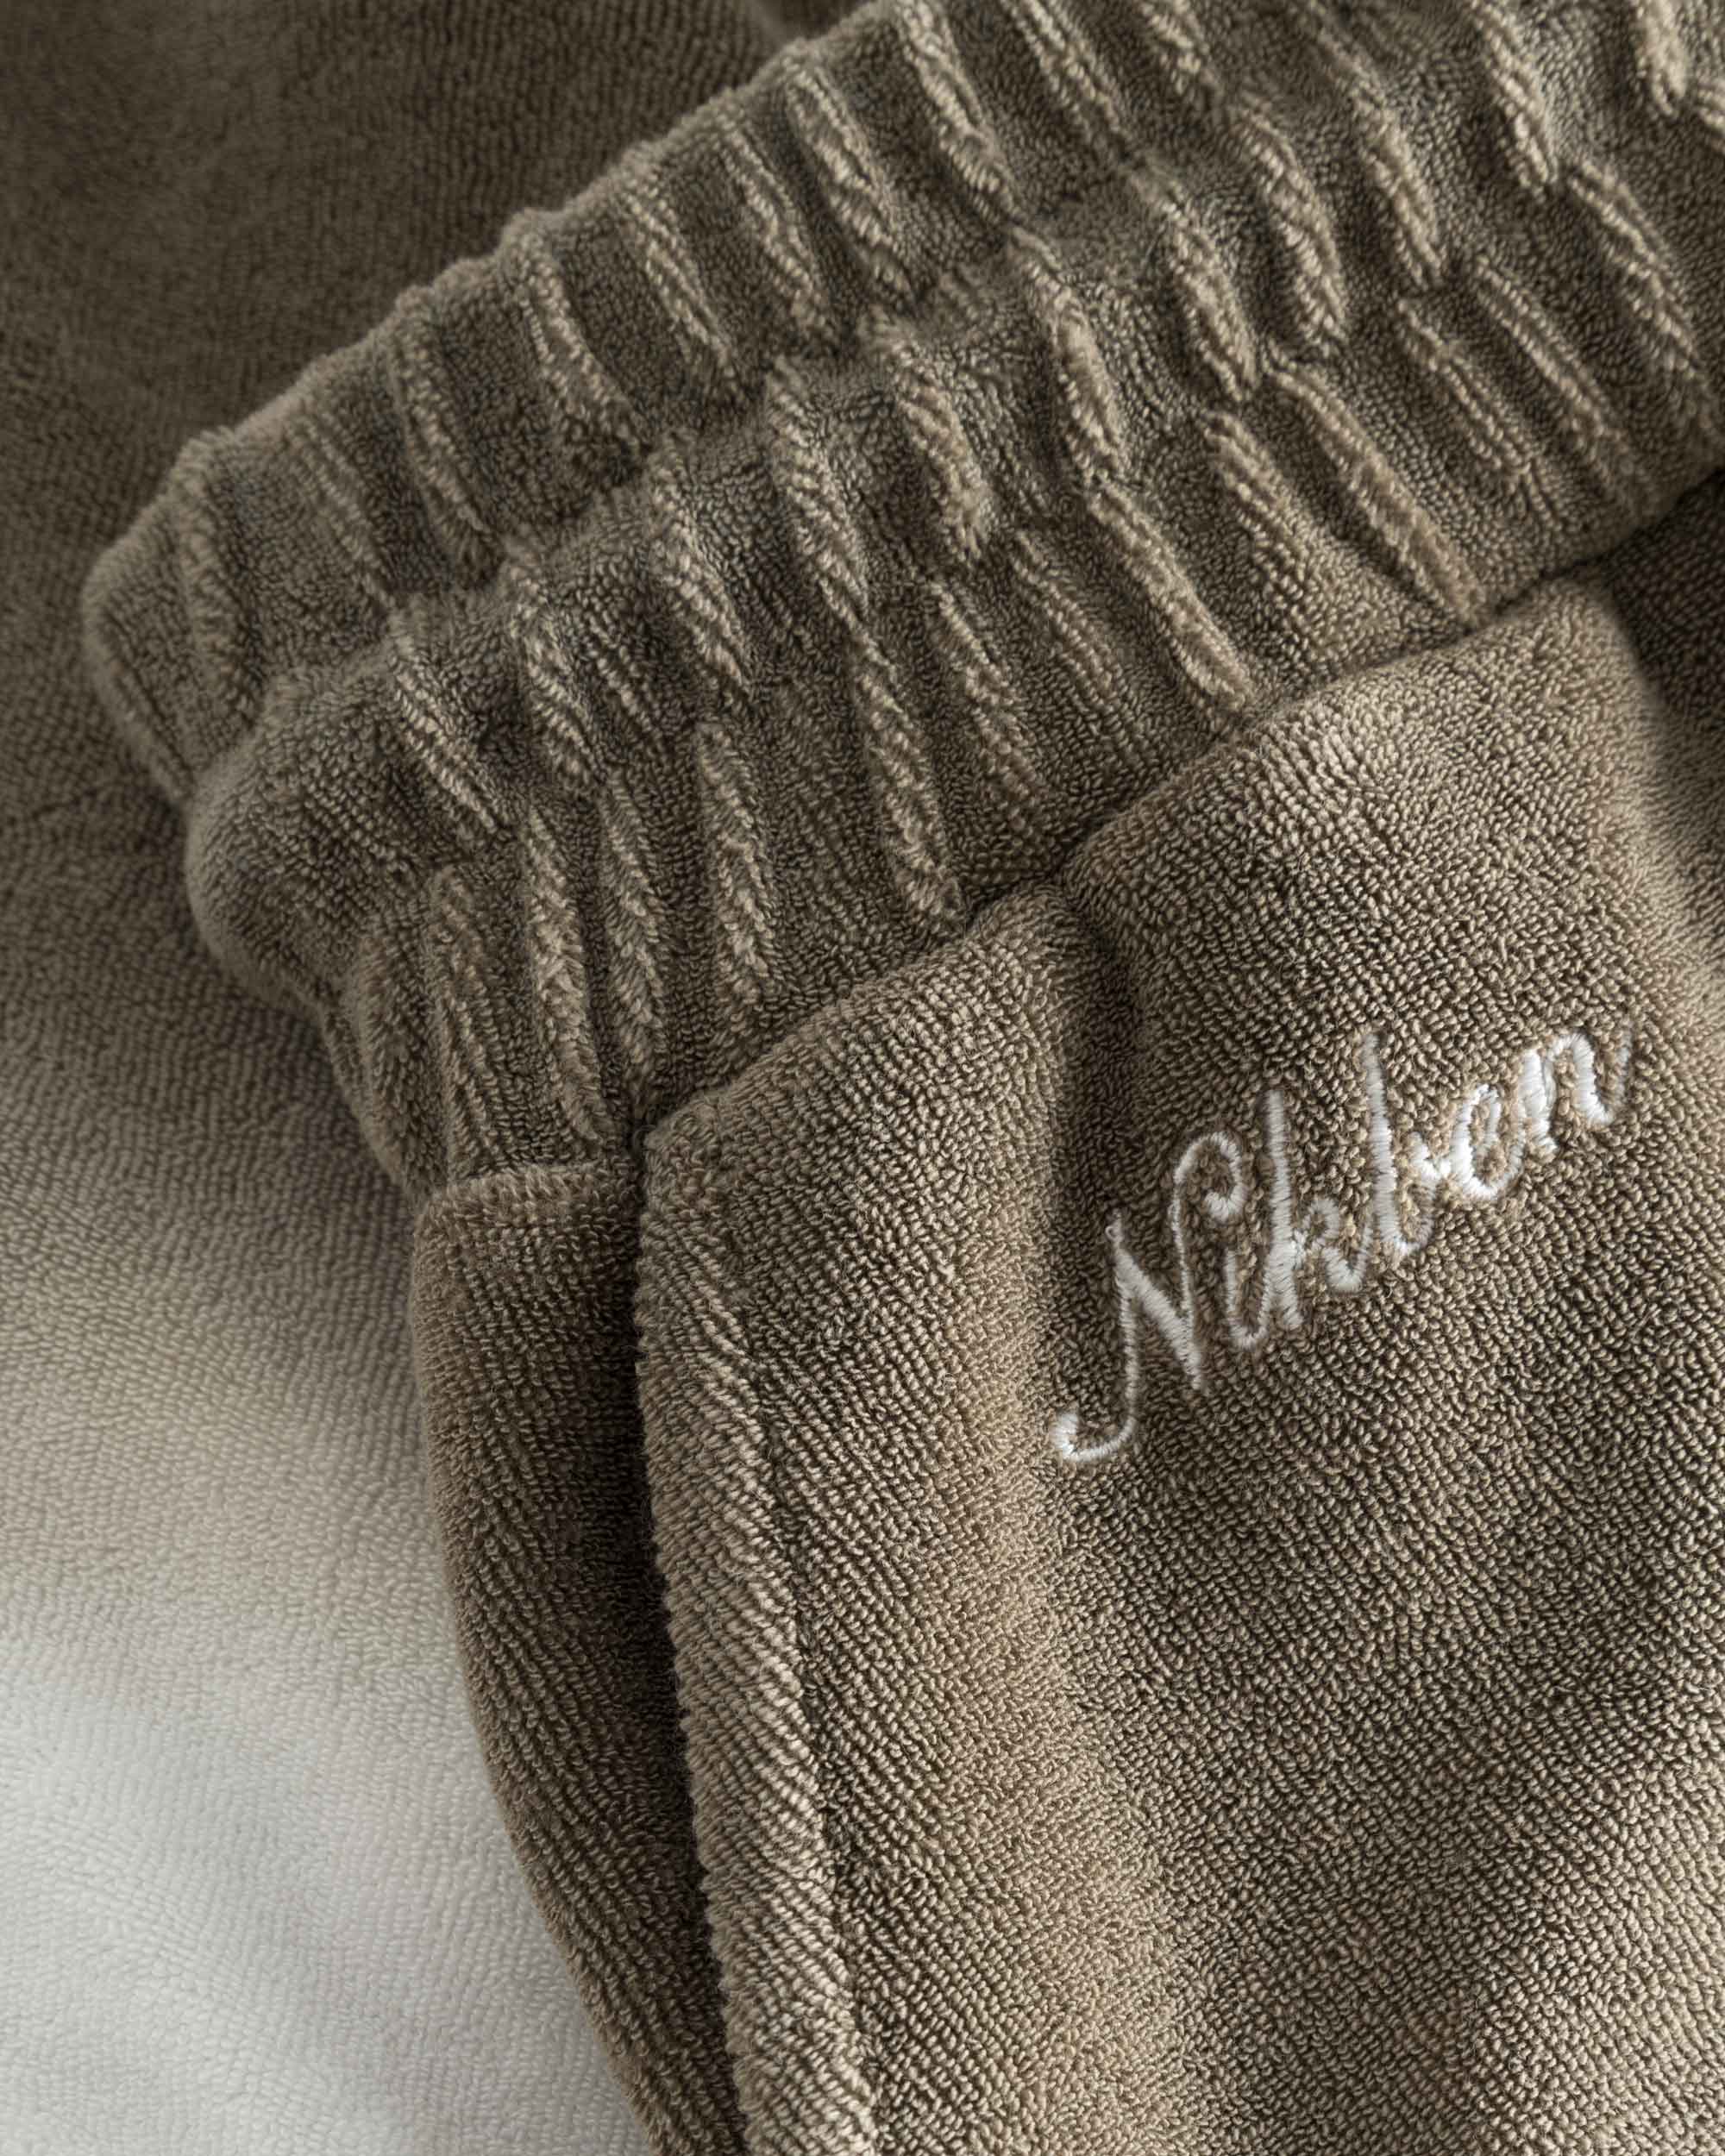 Close up on embroidered logo on brown and white low cut shorts in terry toweling fabric